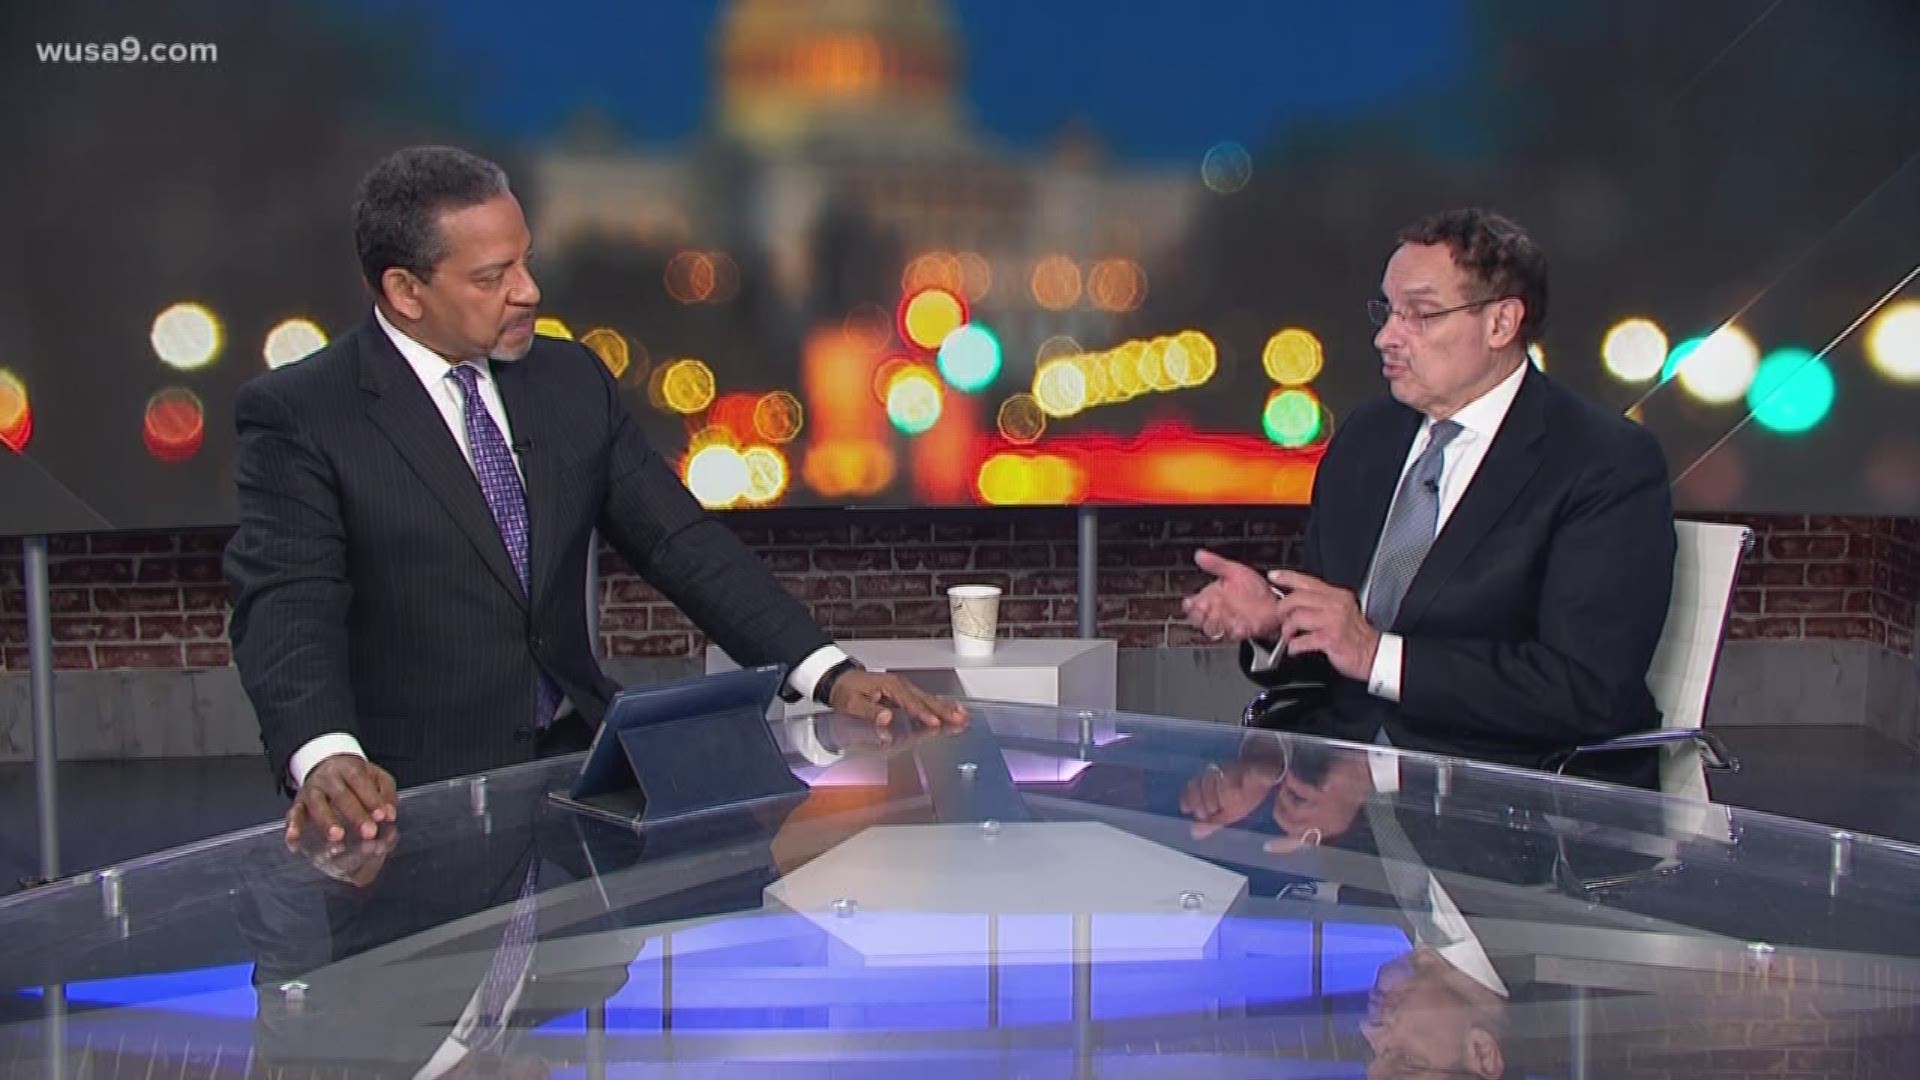 The DC Council approves a bill to build a new hospital in DC. We are speaking with former DC Mayor Vincent Gray about this and other bills that were passed by the DC council.